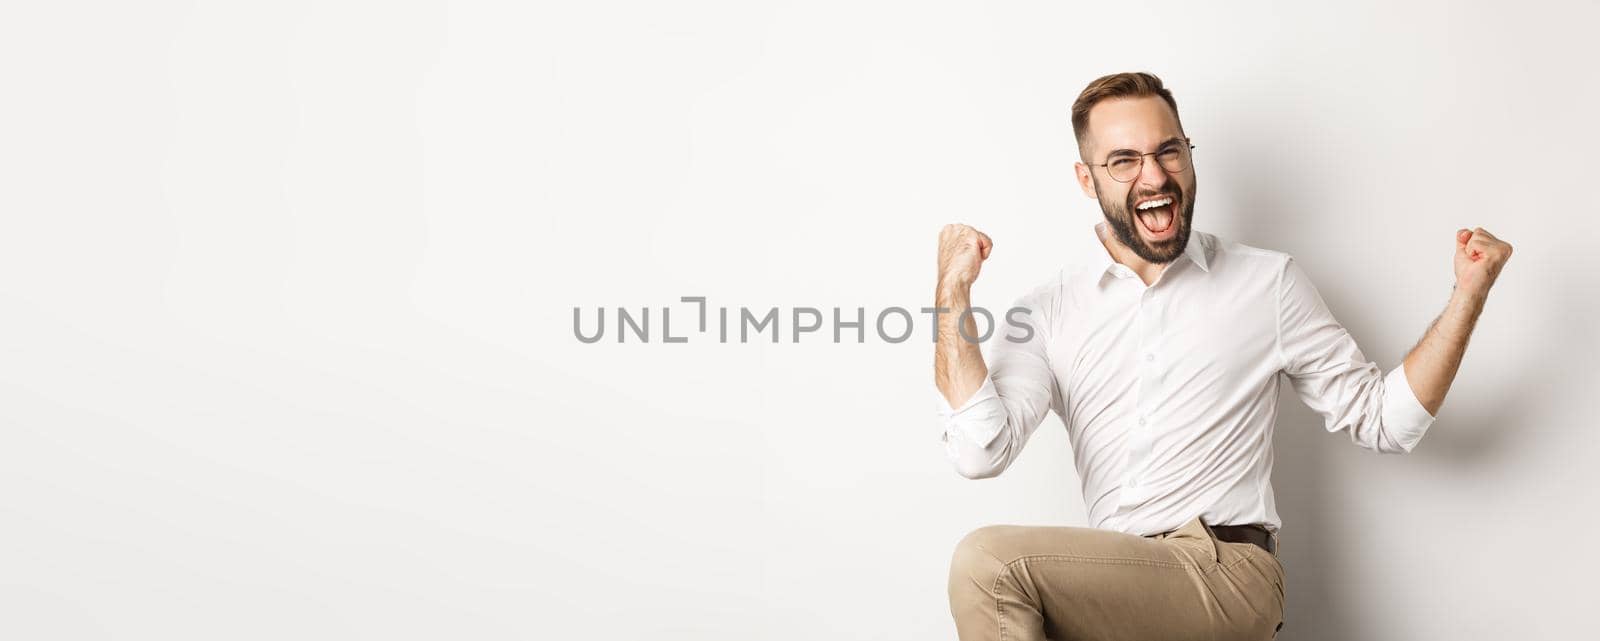 Successful businessman rejoicing, raising hands up and celebrating victory, winning something, standing over white background.